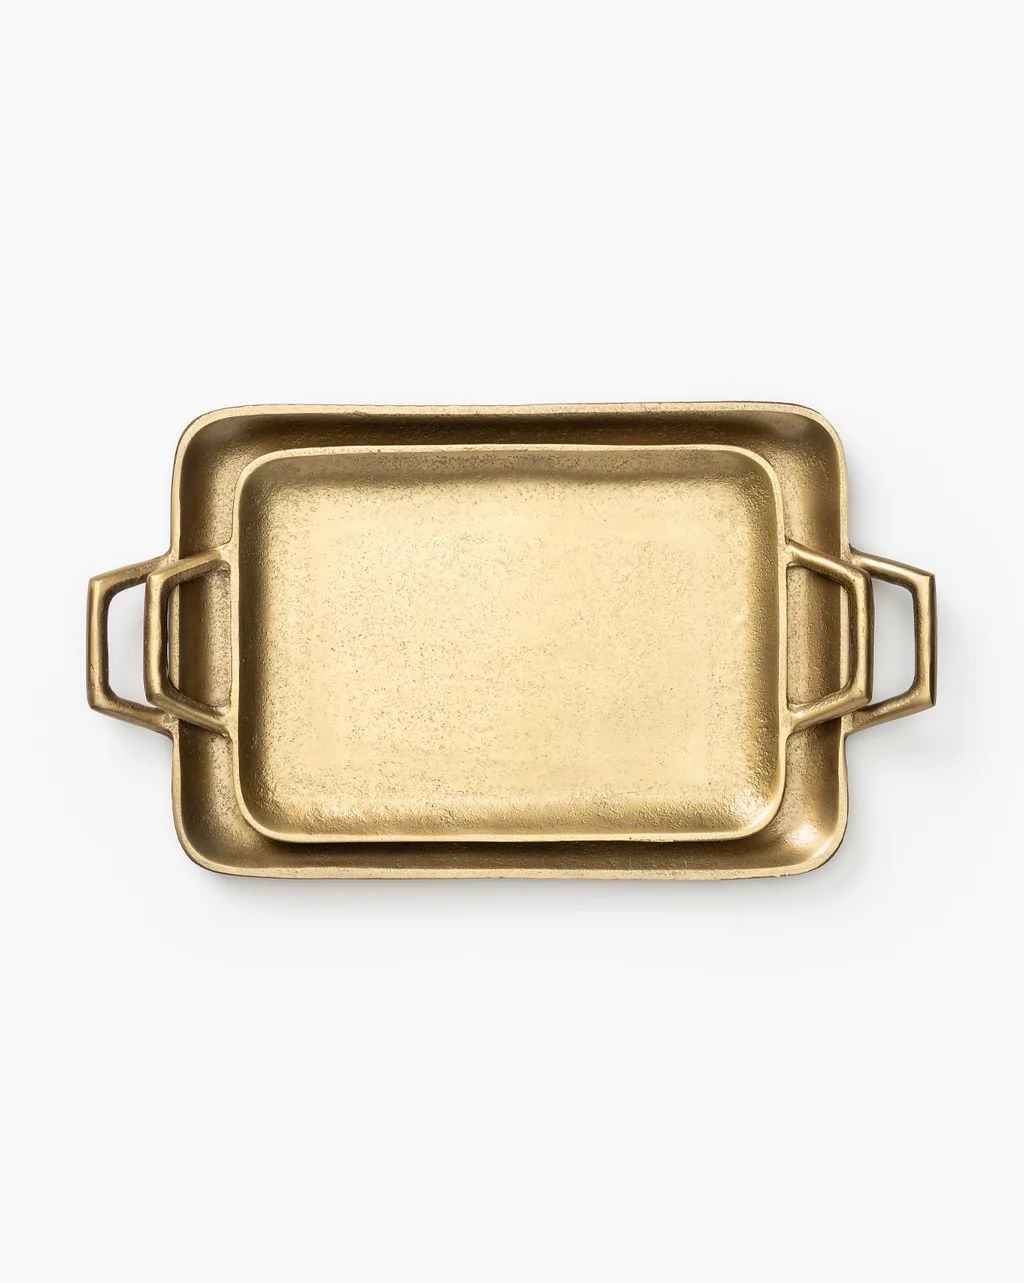 Adrienne Brass Tray | McGee & Co.